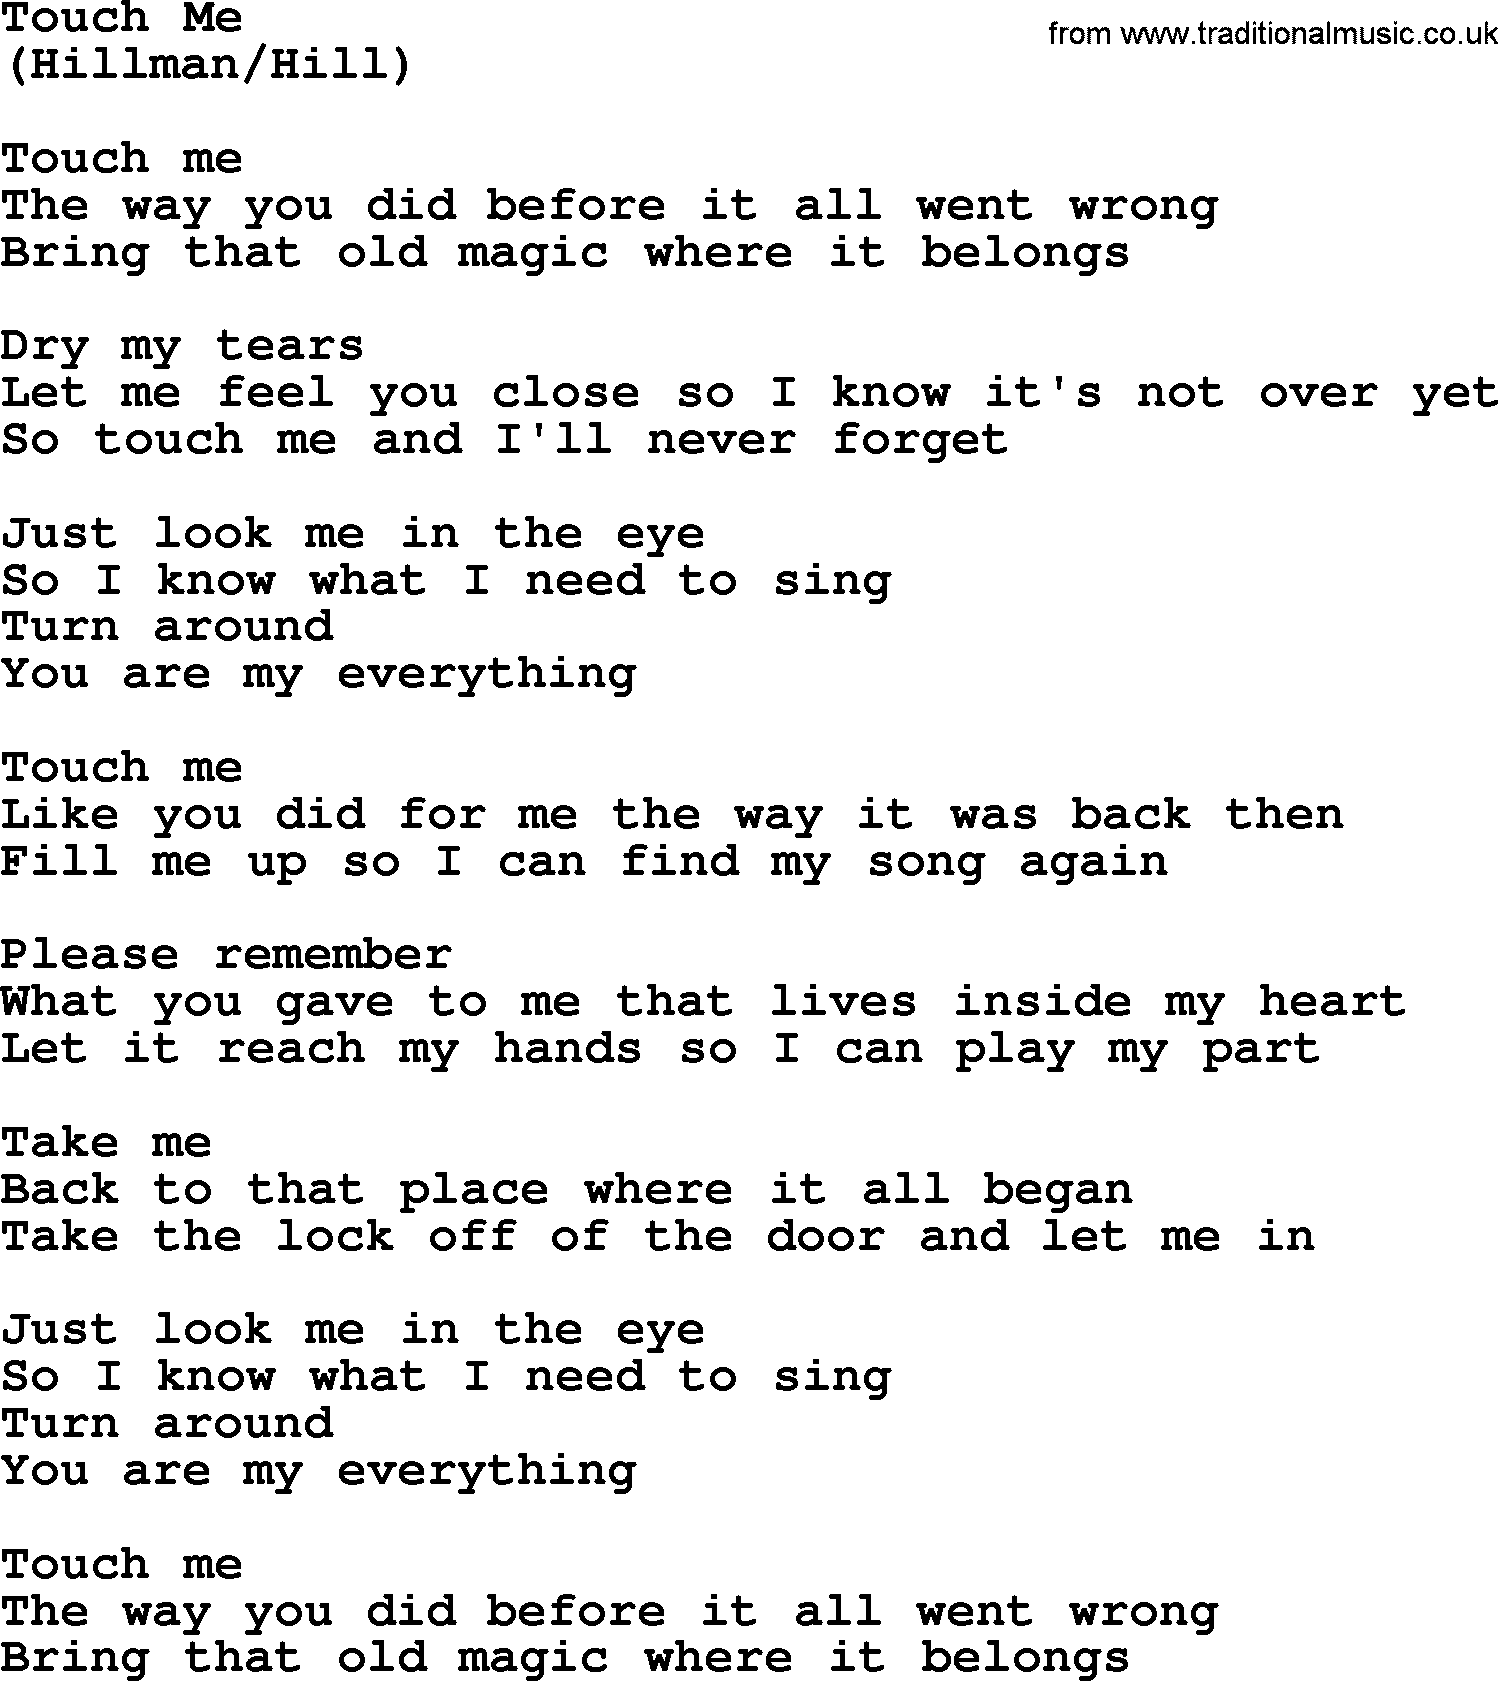 Touch Me, by The Byrds - lyrics with pdf